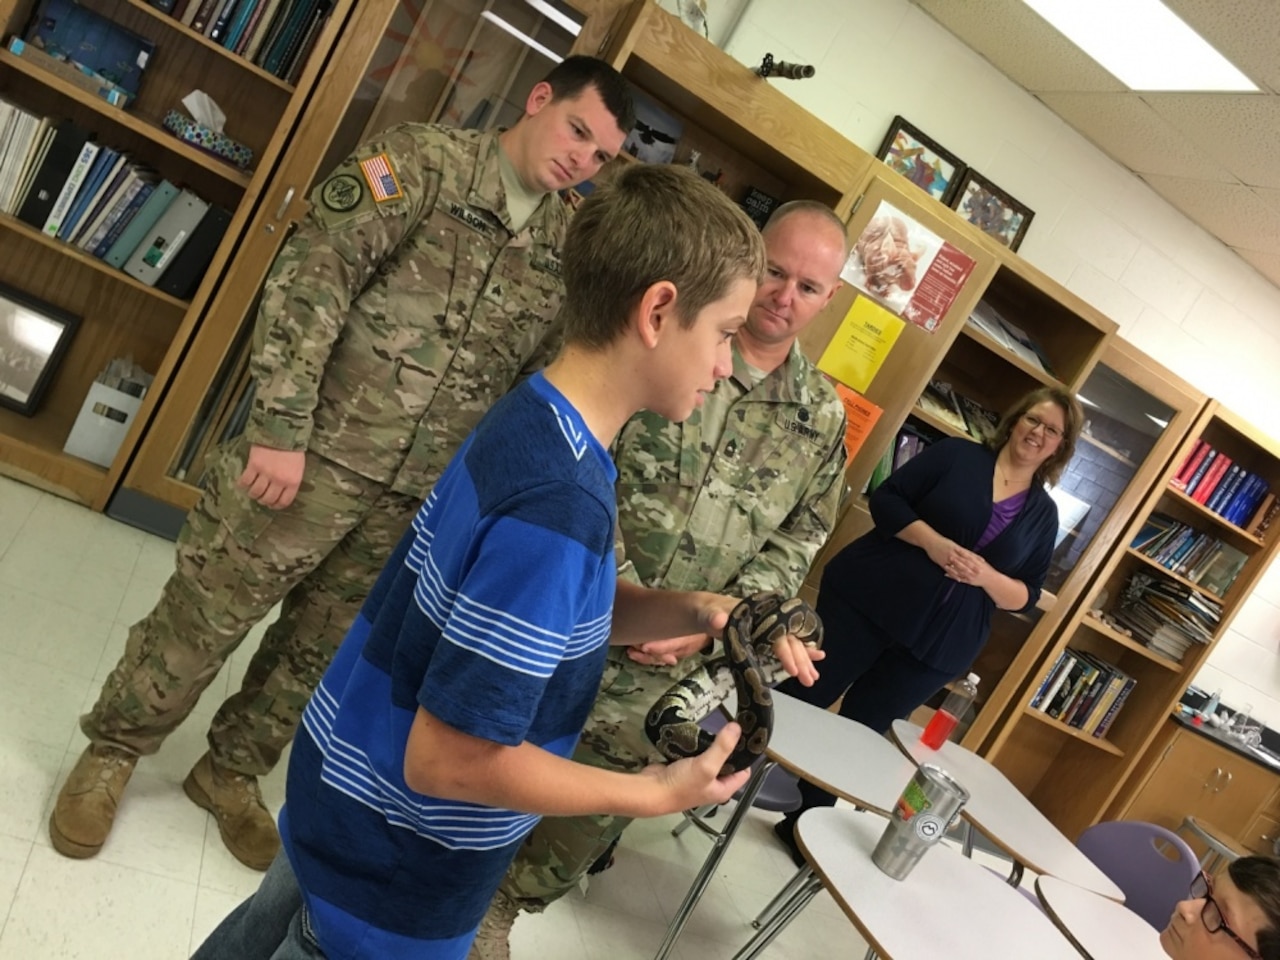 Eighth-grade Earth science student Blayne Smith does a show-and-tell of his ball python, Killer, as Army Sgt. Jacob D. Wilson, U.S. Army Operational Test Command's command group noncommissioned officer in charge, left, and Army Master Sgt. Earnest L. Vance, OTC's Test Technology Directorate NCOIC, listen to Smith's presentation as Monica L. Mitchell, 8th-grade Earth Science teacher, observes at right during an OTC Adopt-A-School visit to Florence Middle School, Texas, Sept. 9, 2016. Army photo by Michael Novogradac